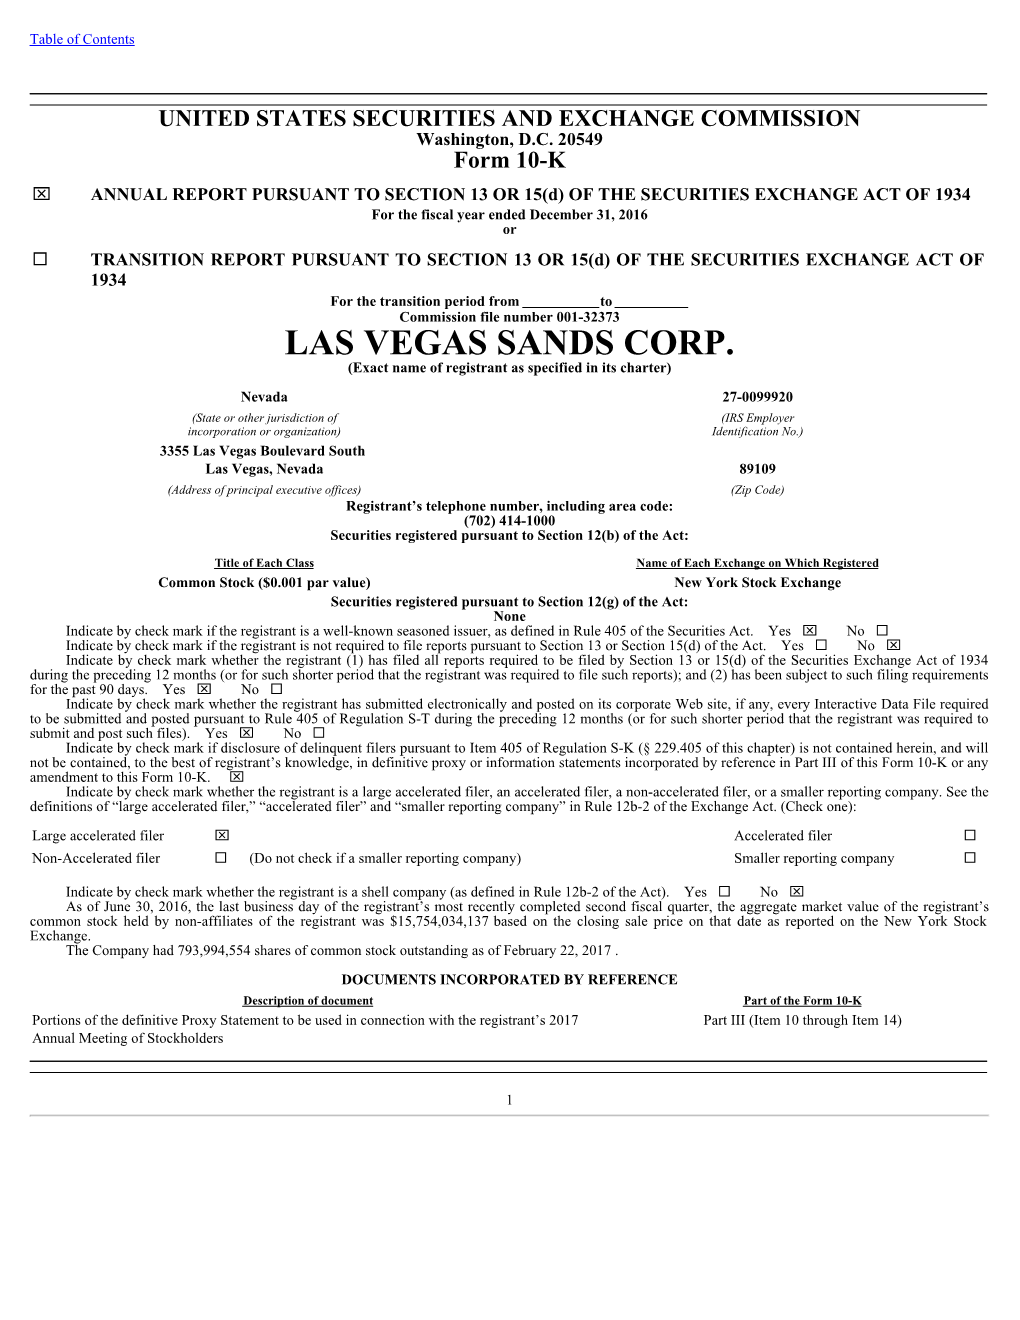 LAS VEGAS SANDS CORP. (Exact Name of Registrant As Specified in Its Charter)